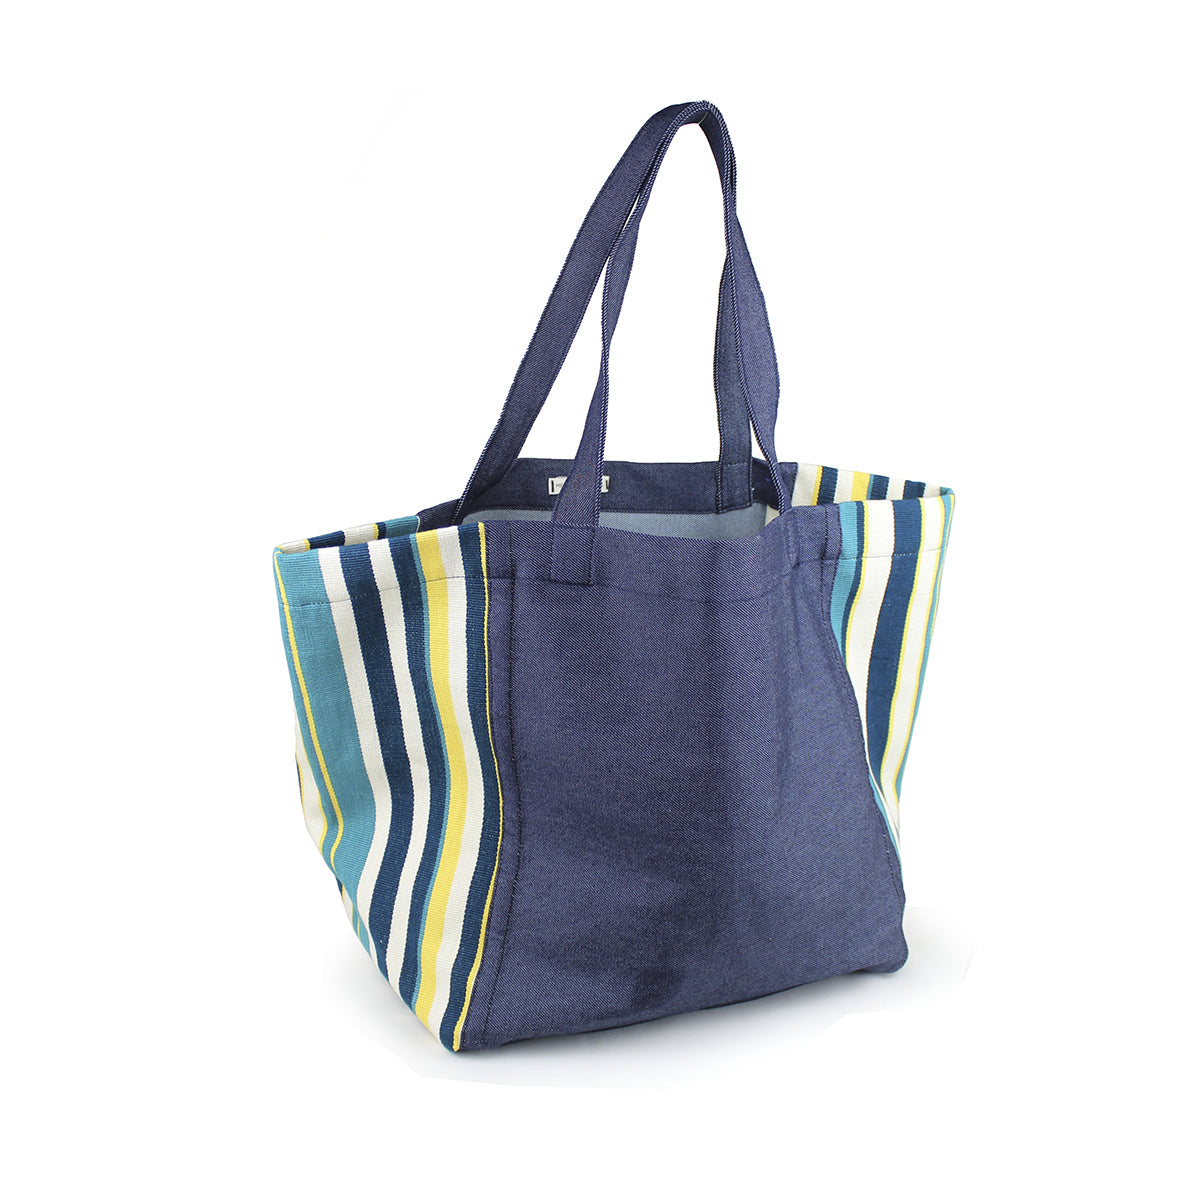 A left-sided angle of the hand woven artisan Blanca Tote in Pacific pattern.  The bag has a dark wash denim center and handles. The ends of the bags have a triangle finish in blue and yellow vertical stripes. 